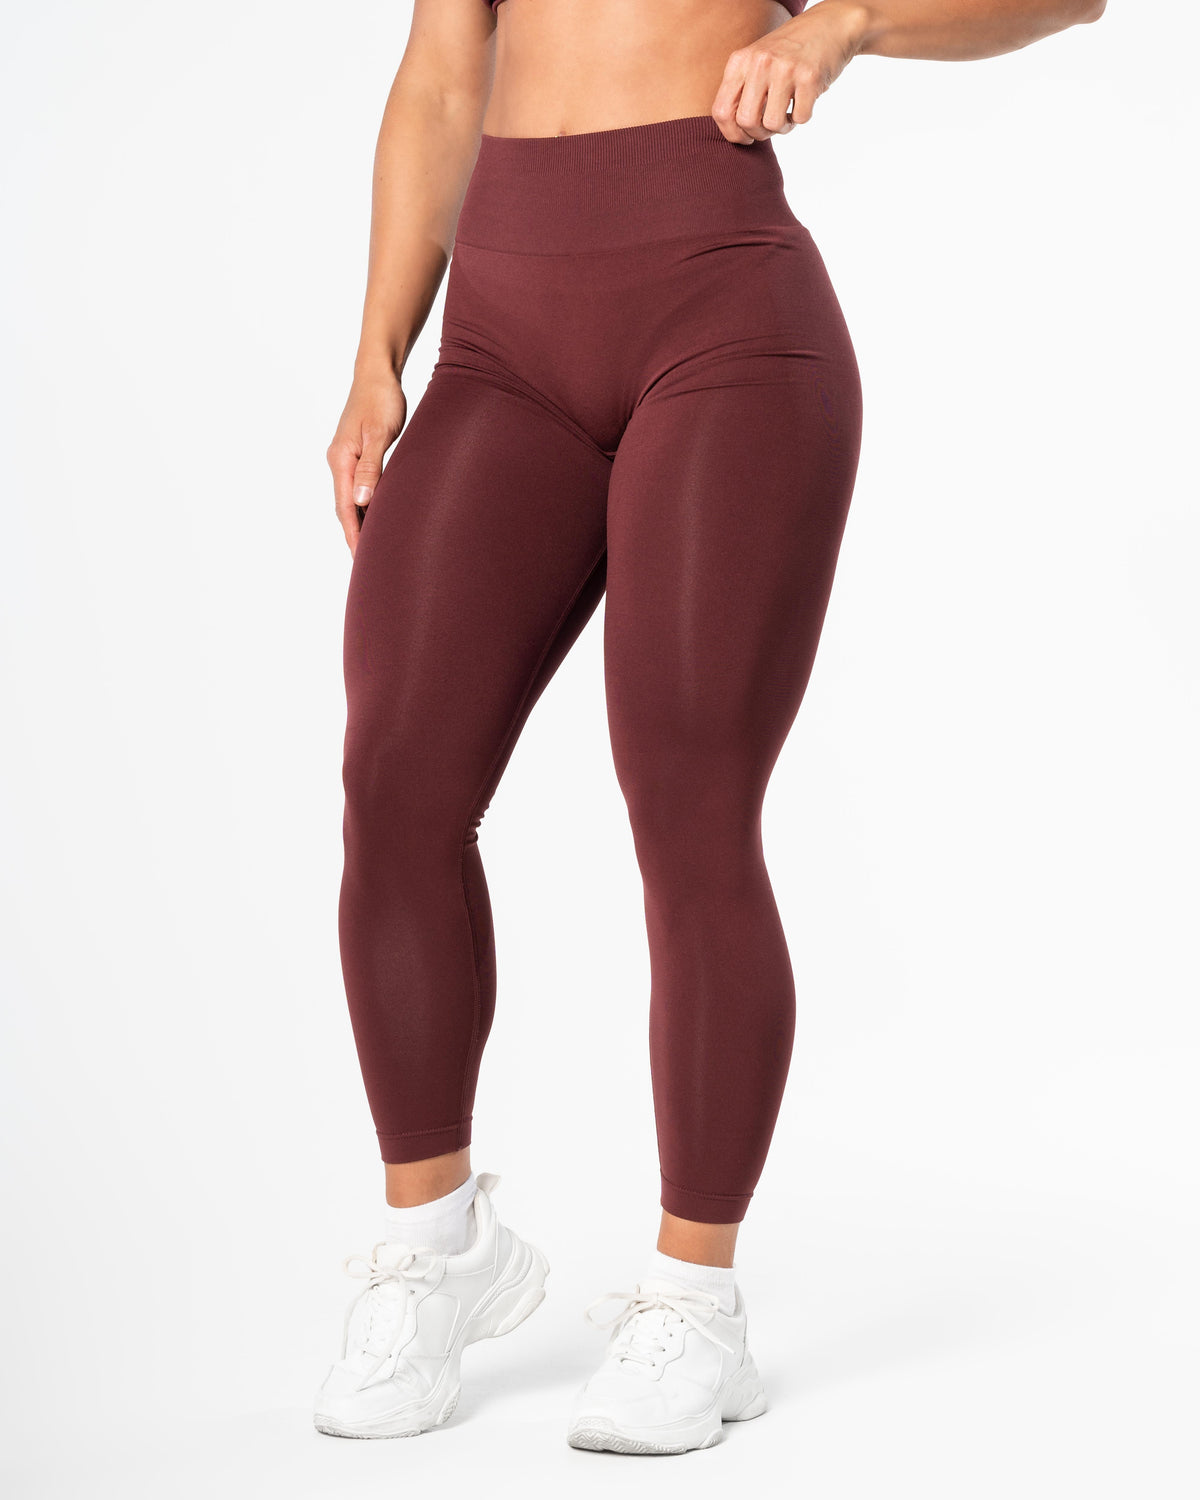 Prime Seamless Tights - Brown - RELODE